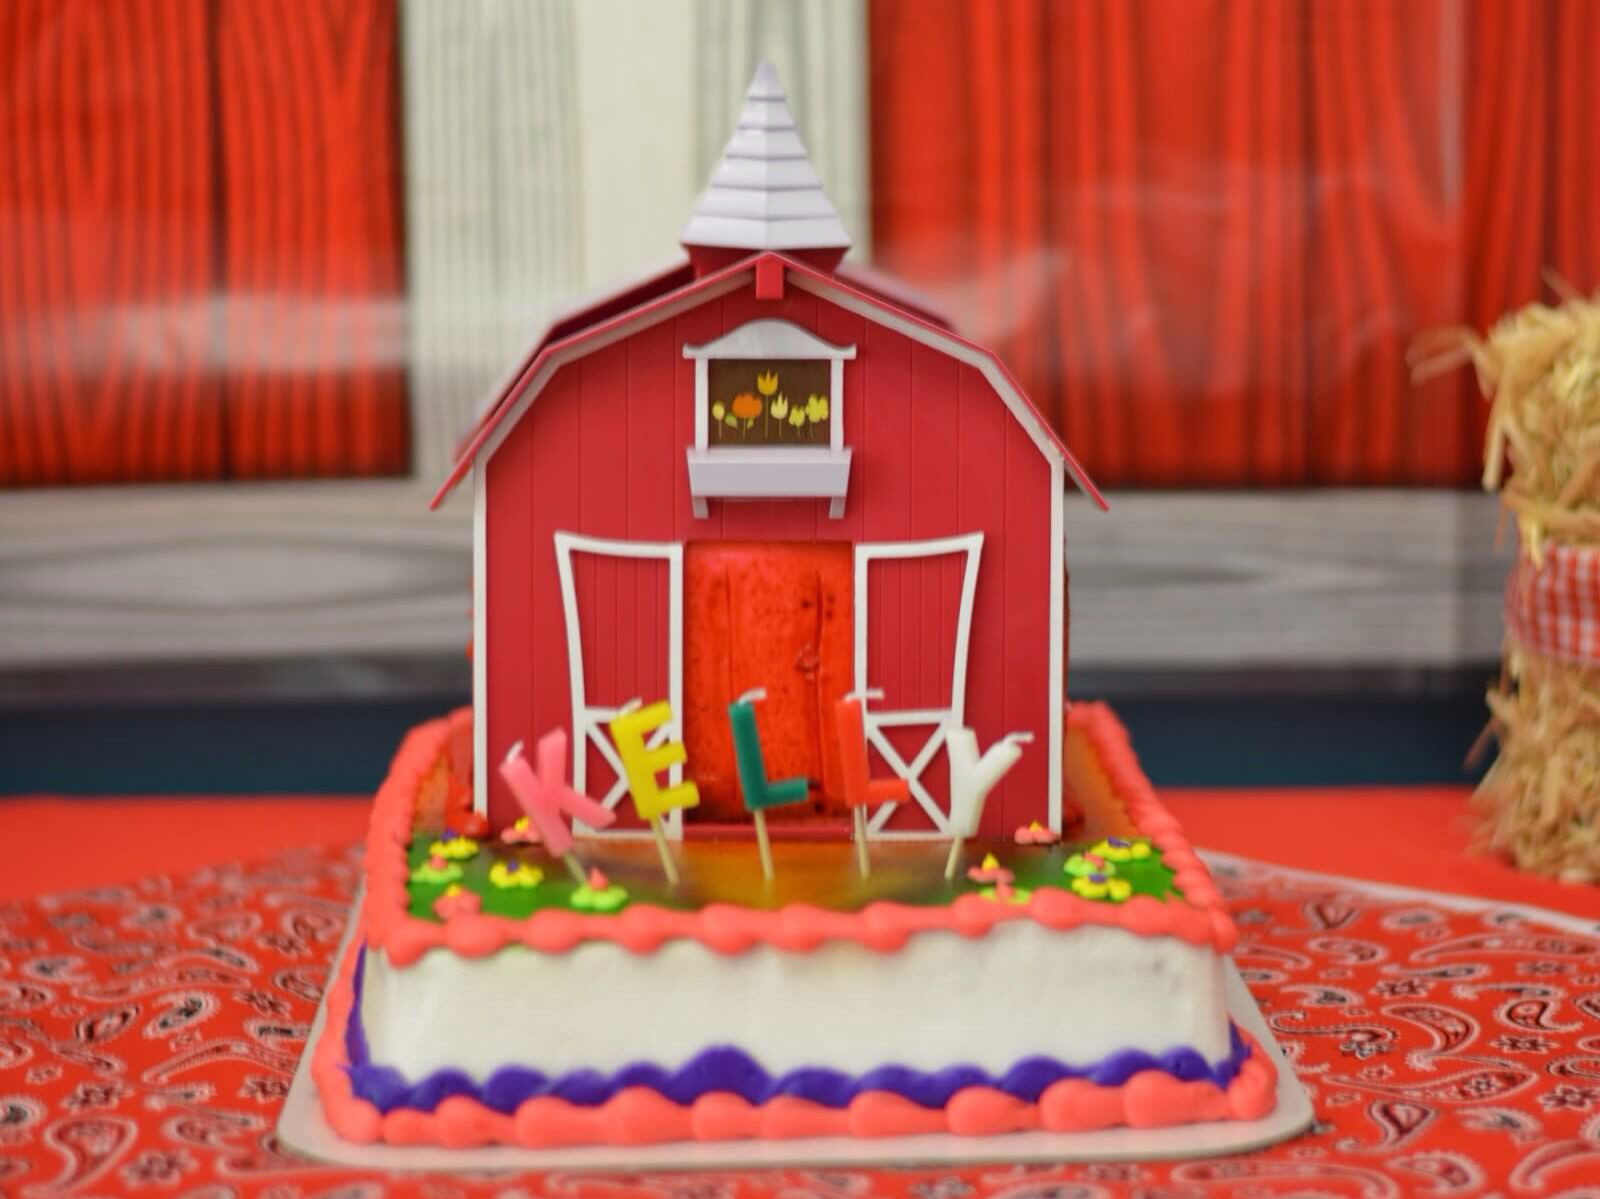 Chica Sprout Birthday Decorations
 Sprout Chica sunshine barn cake